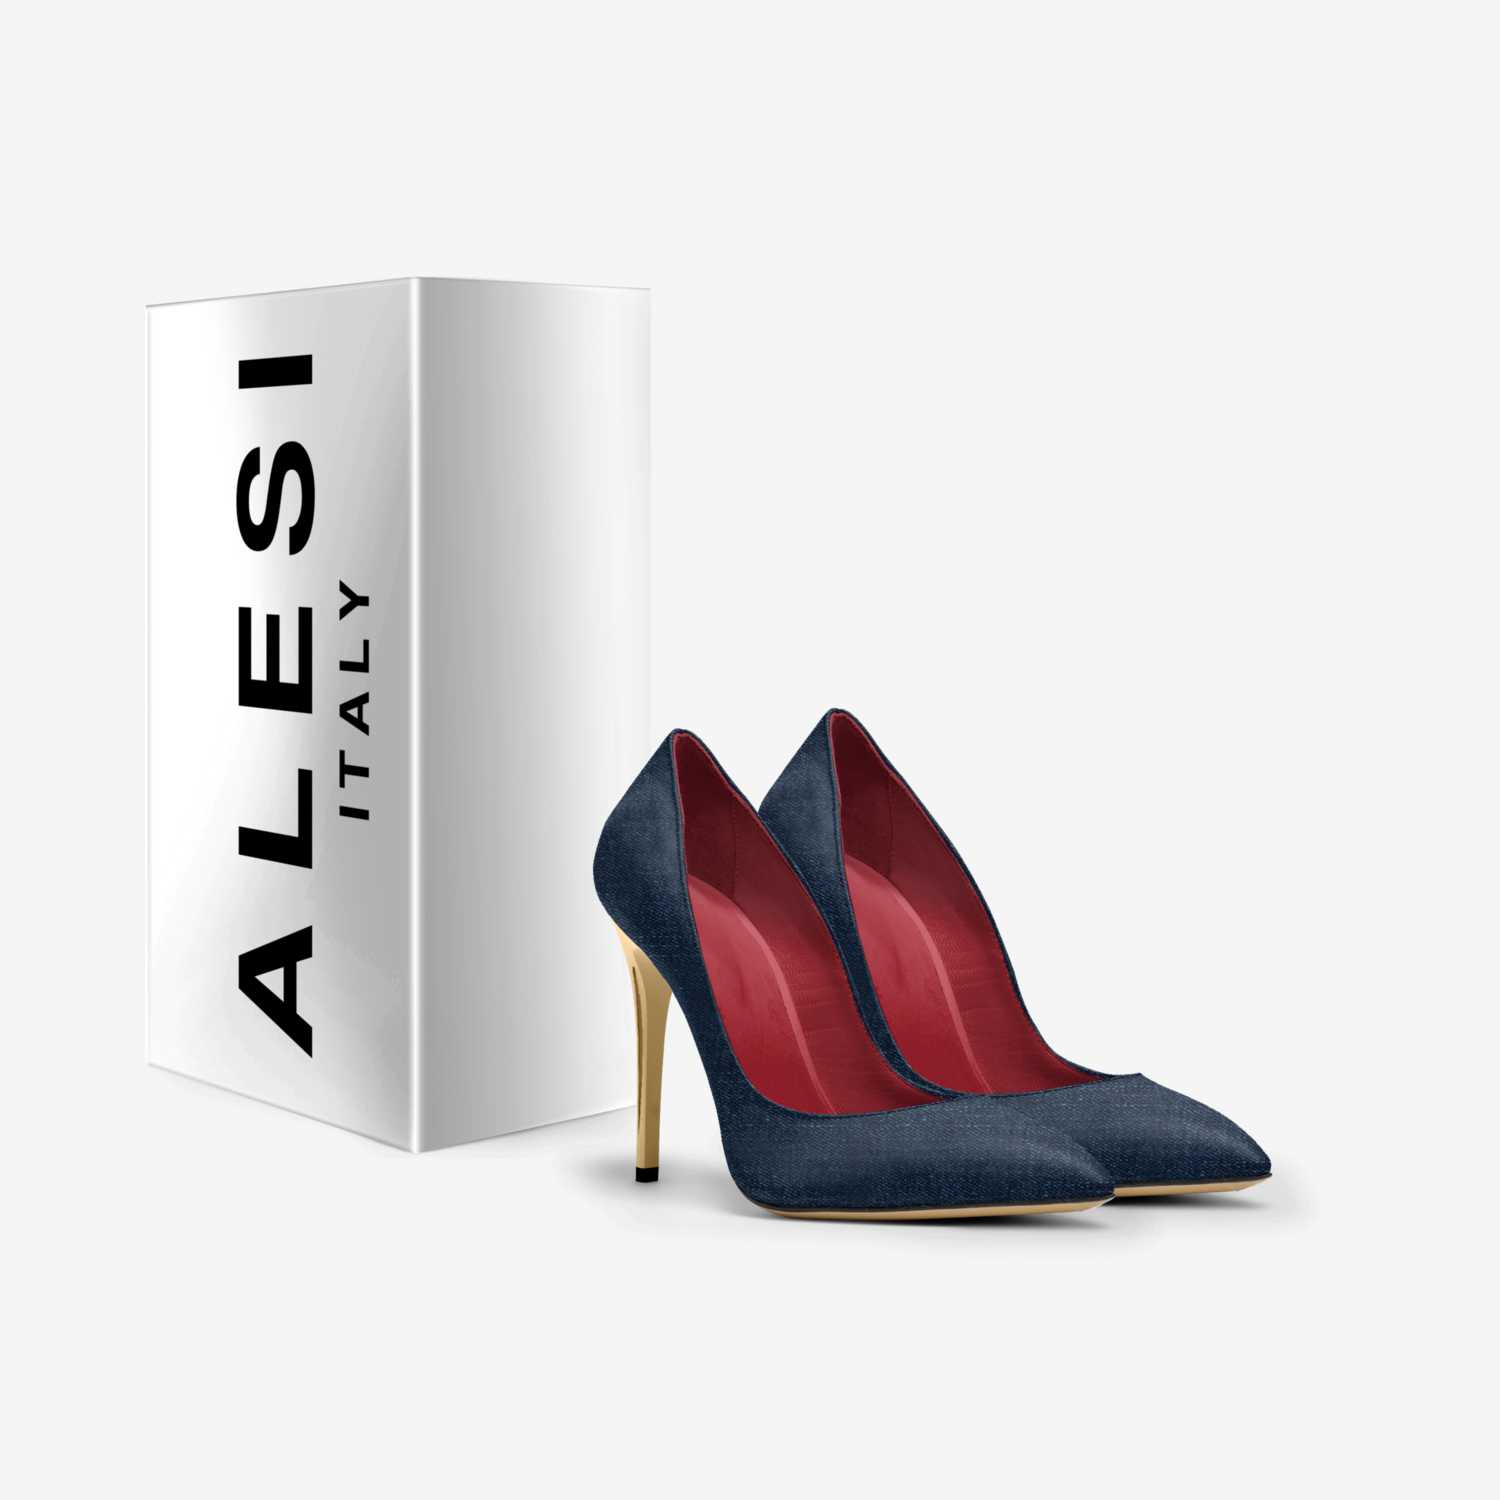 ALESI LUX HEELS custom made in Italy shoes by Lonanthony Parker | Box view